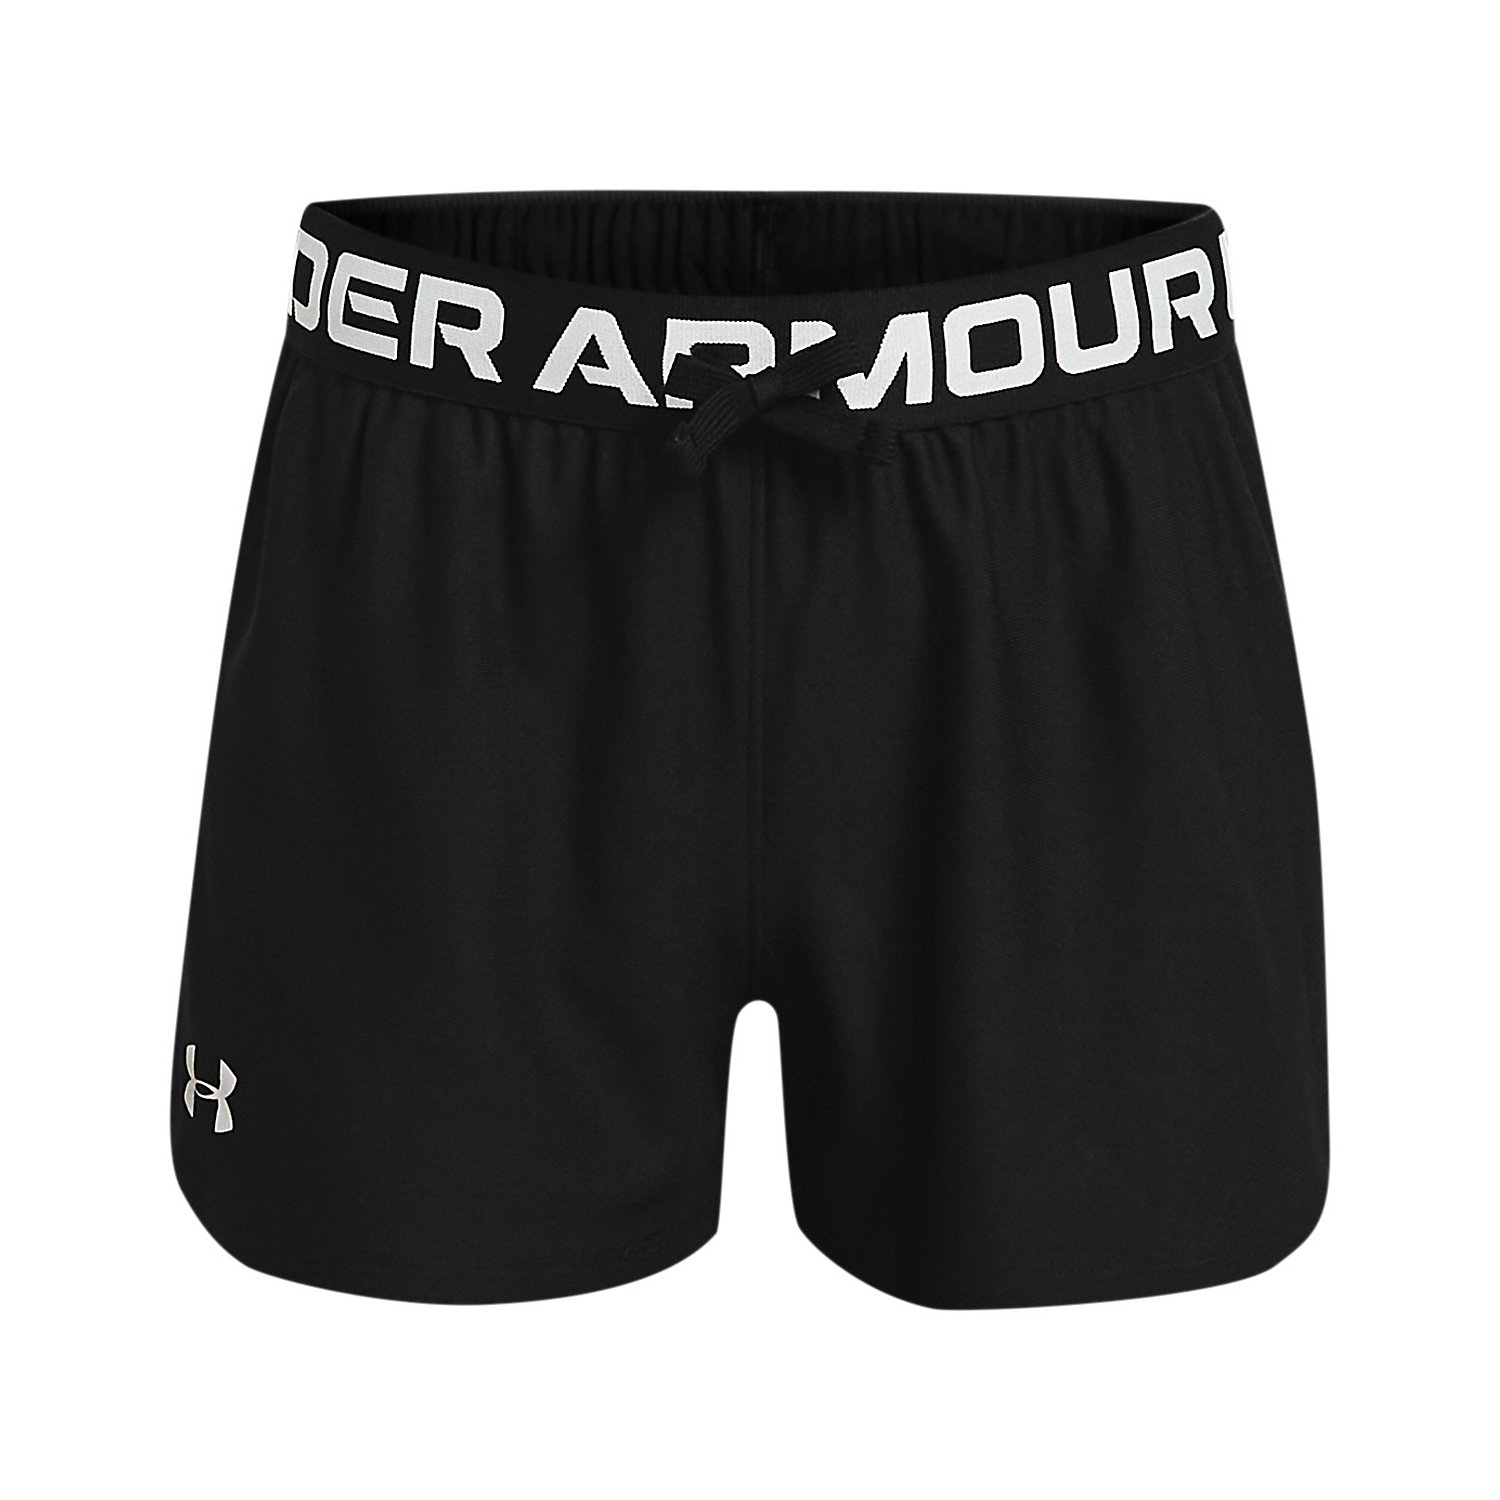 Under Armour Girls Play Up Solid Shorts